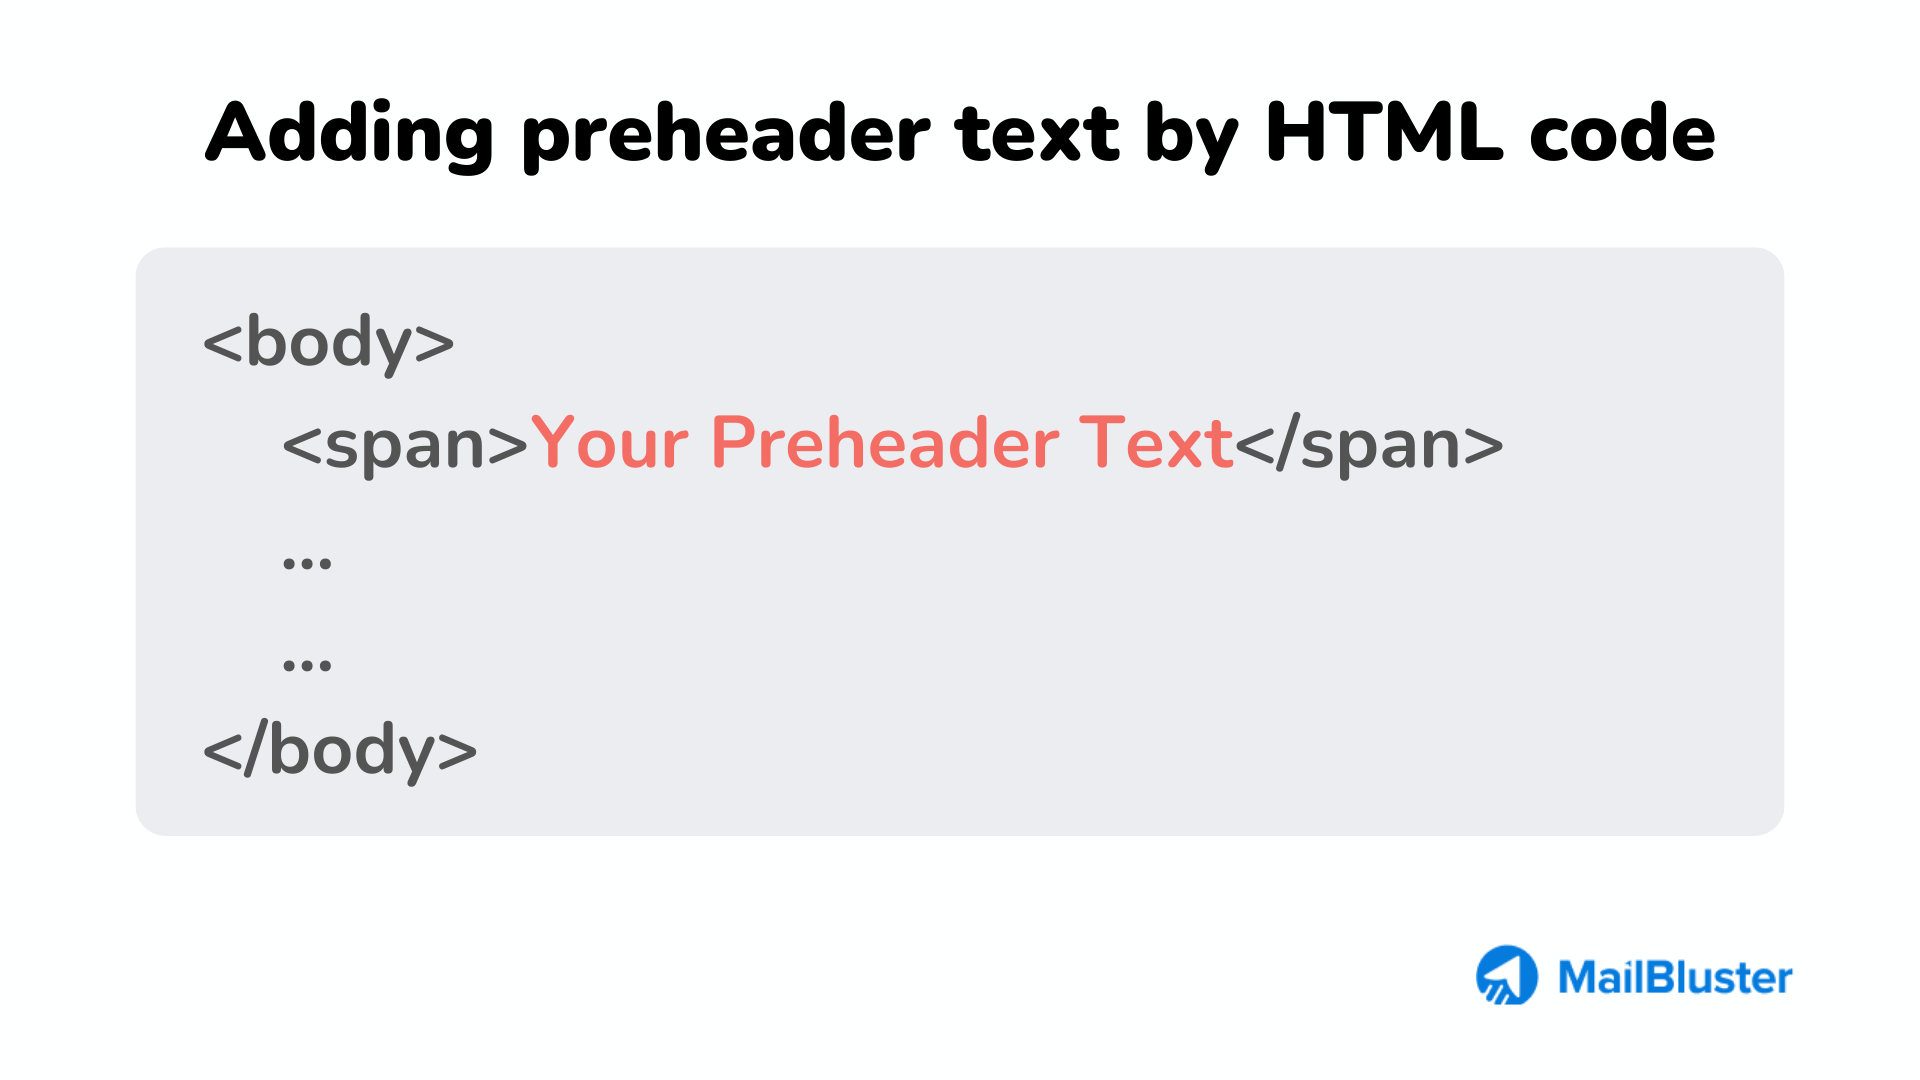 The process of adding preheader text by HTML code